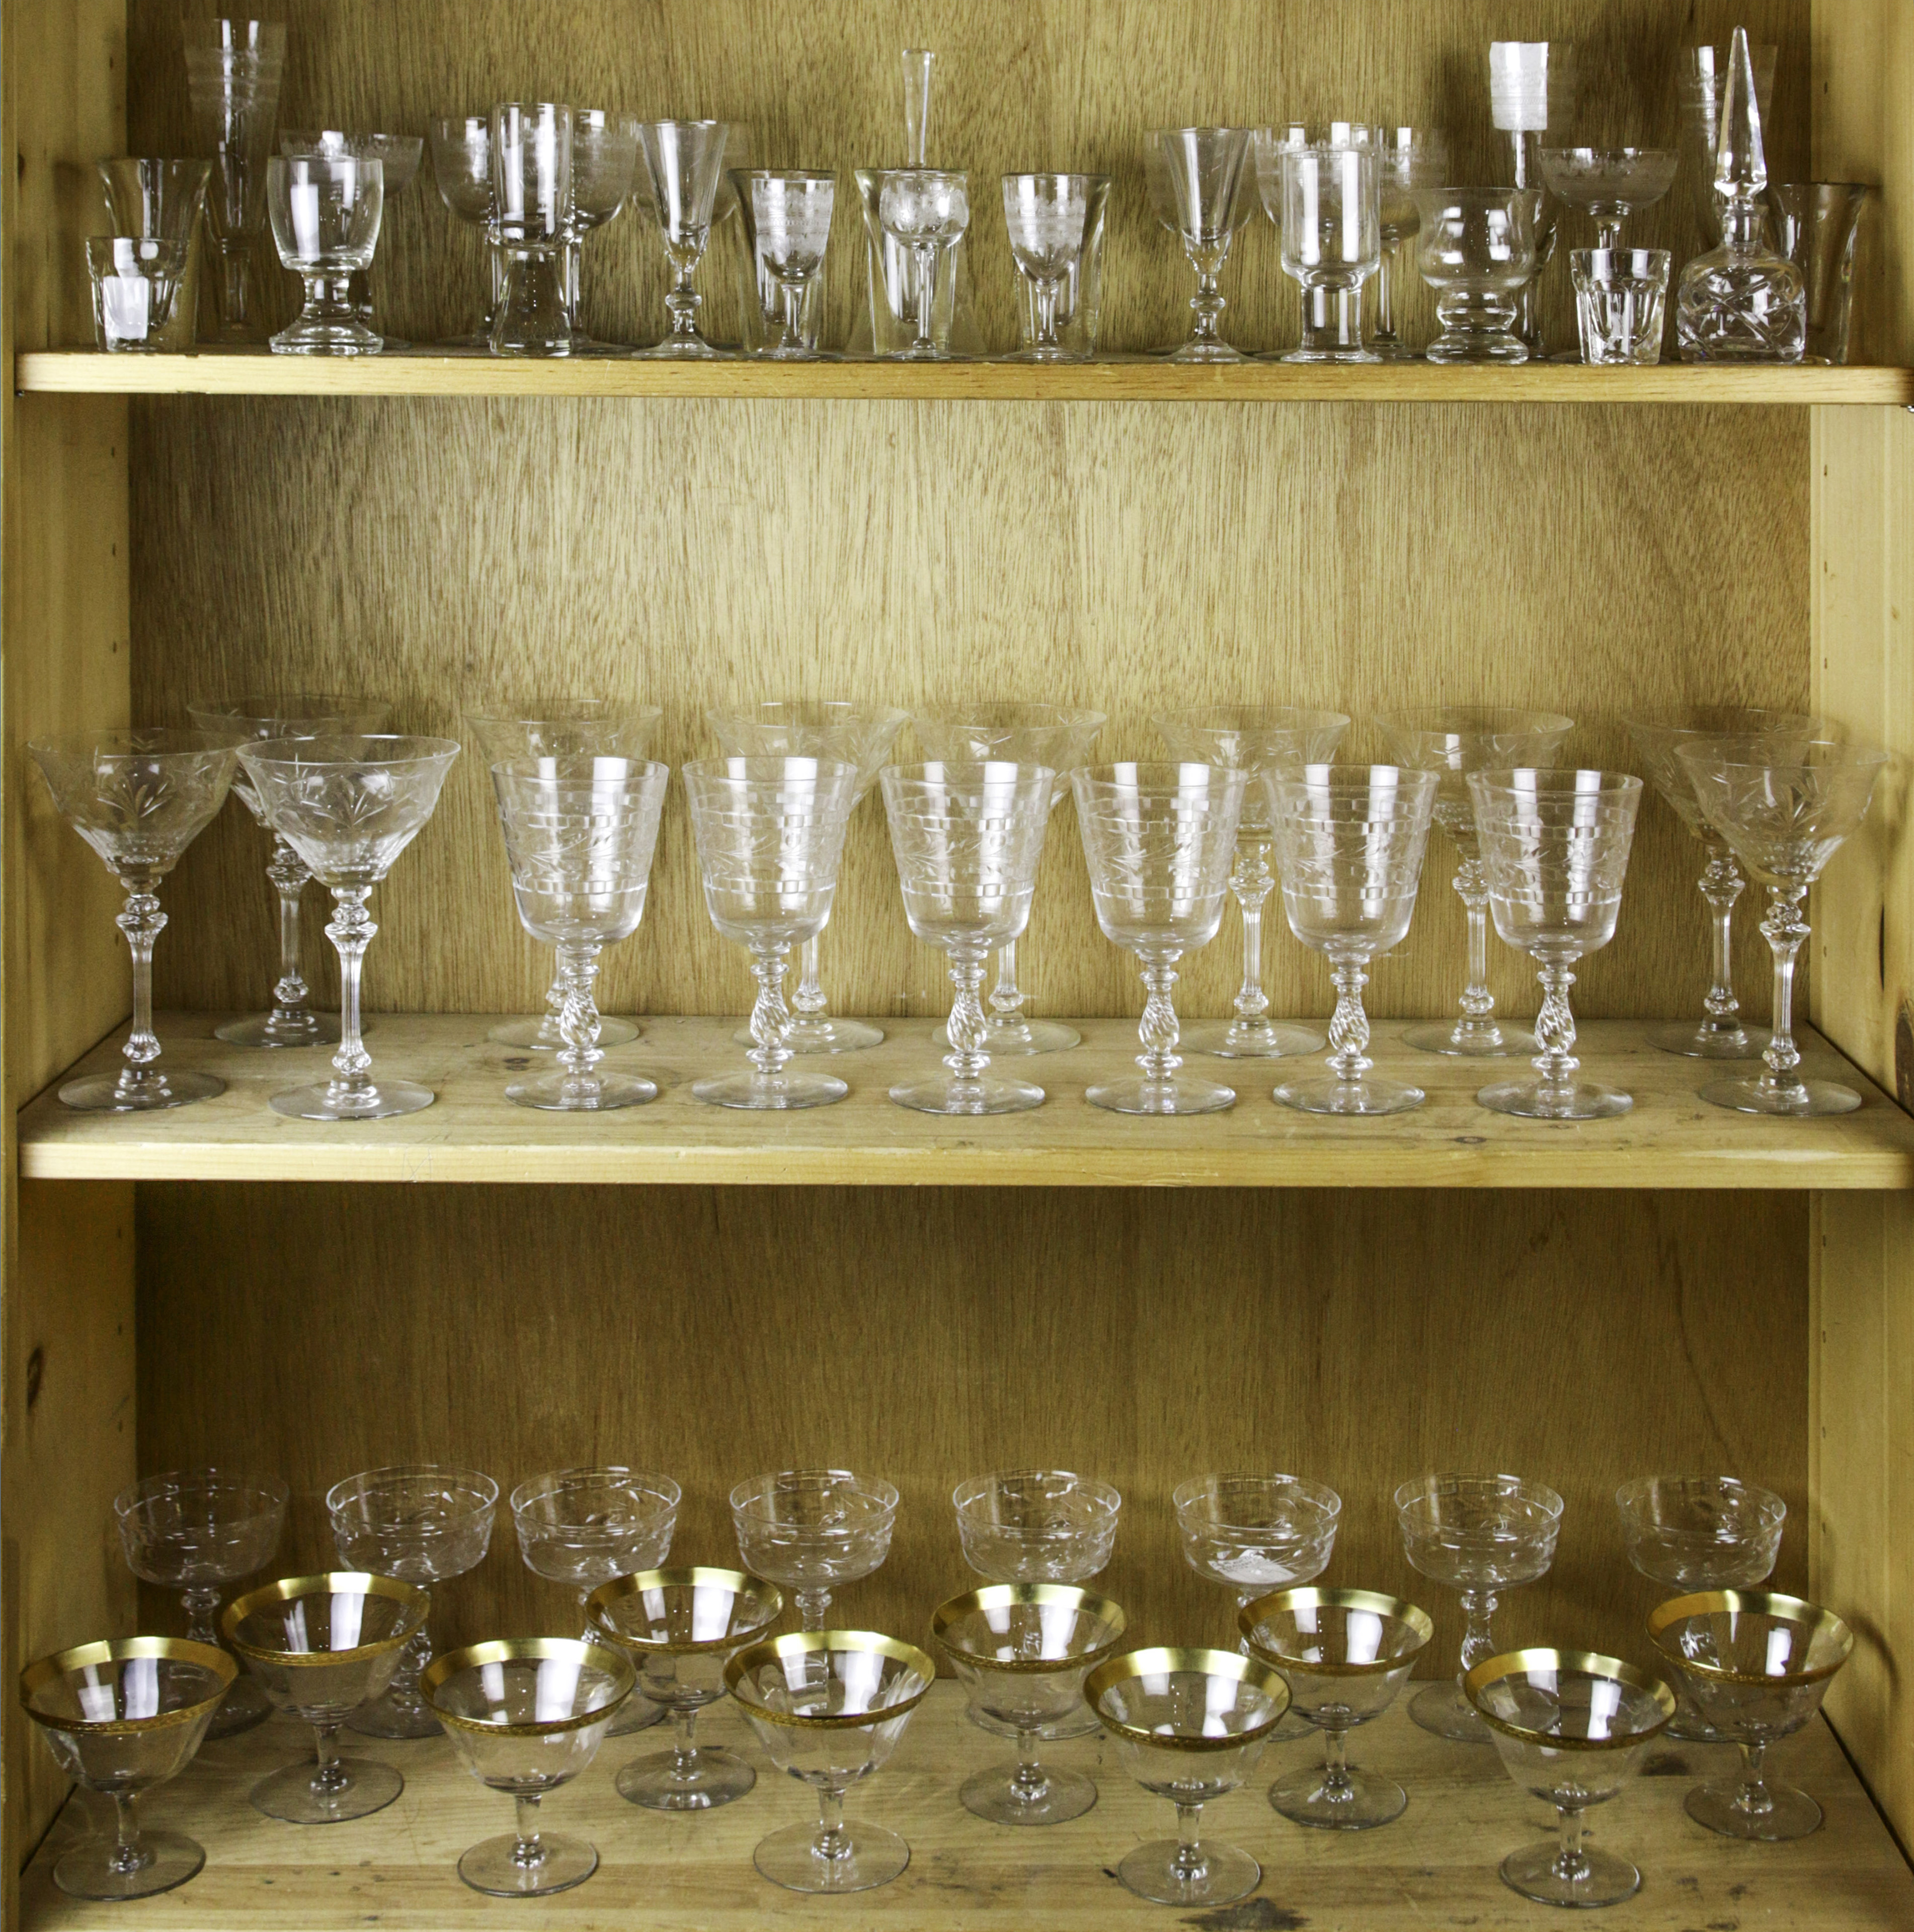 THREE SHELVES OF ETCHED GLASS STEMWARE 3a6618